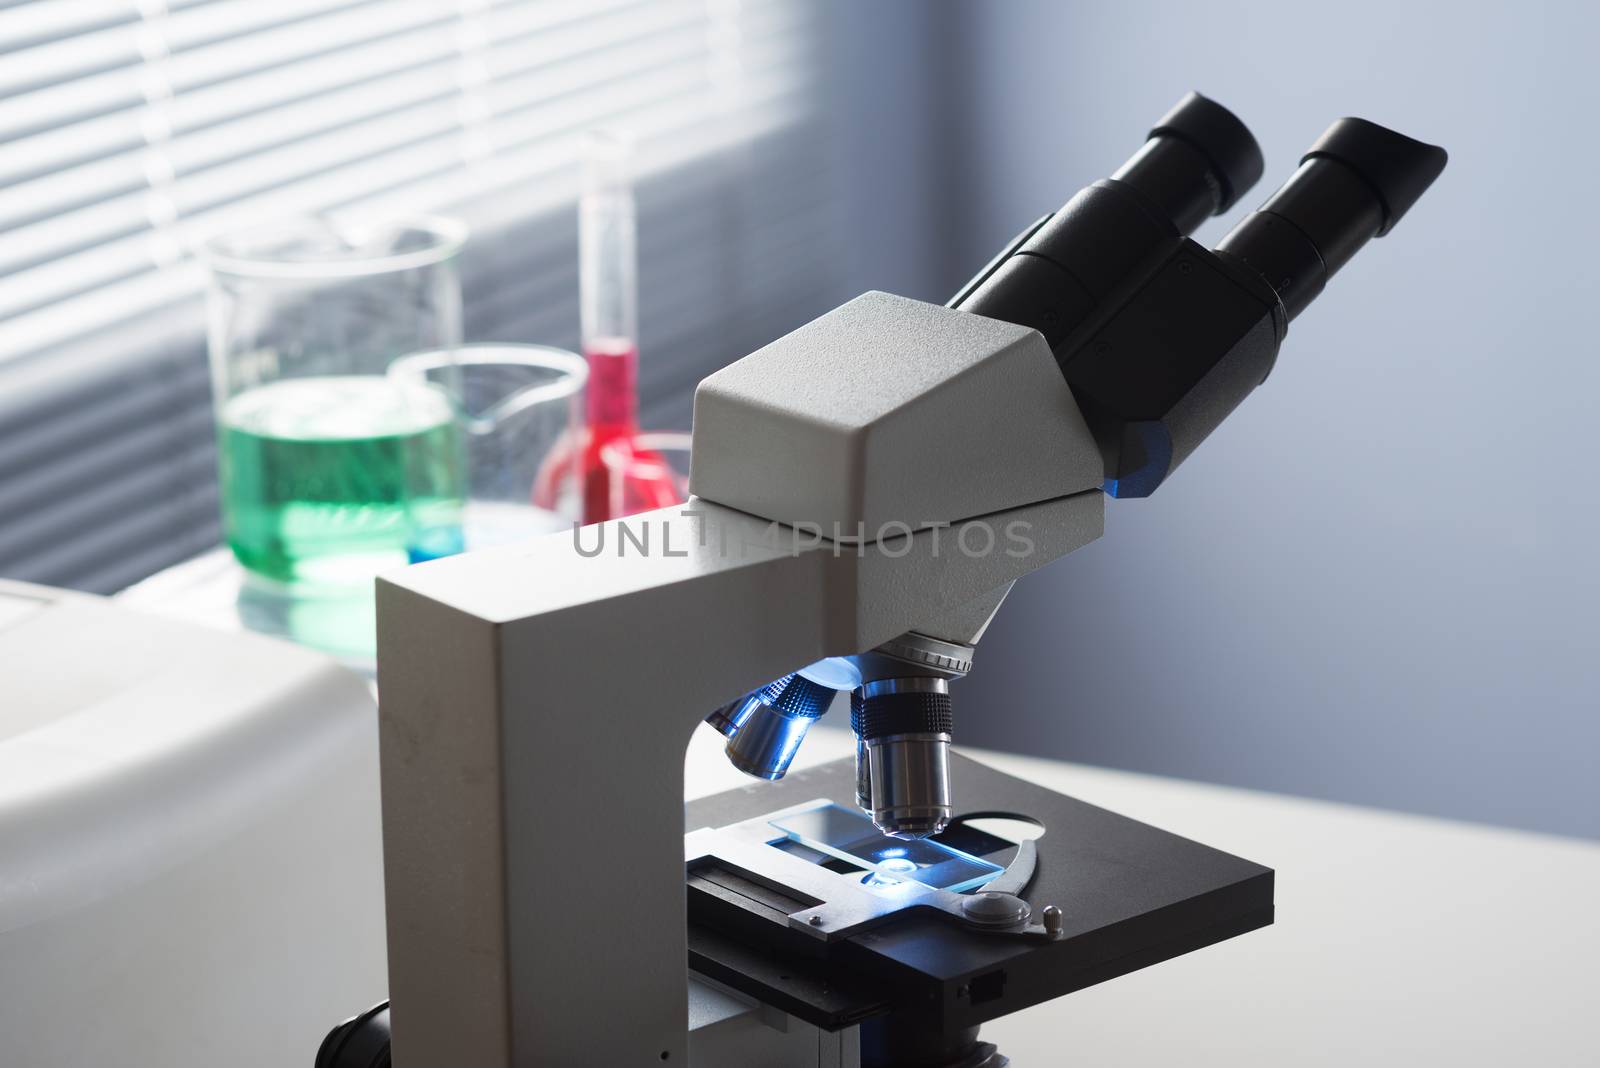 Microscope and laboratory equipment by stokkete